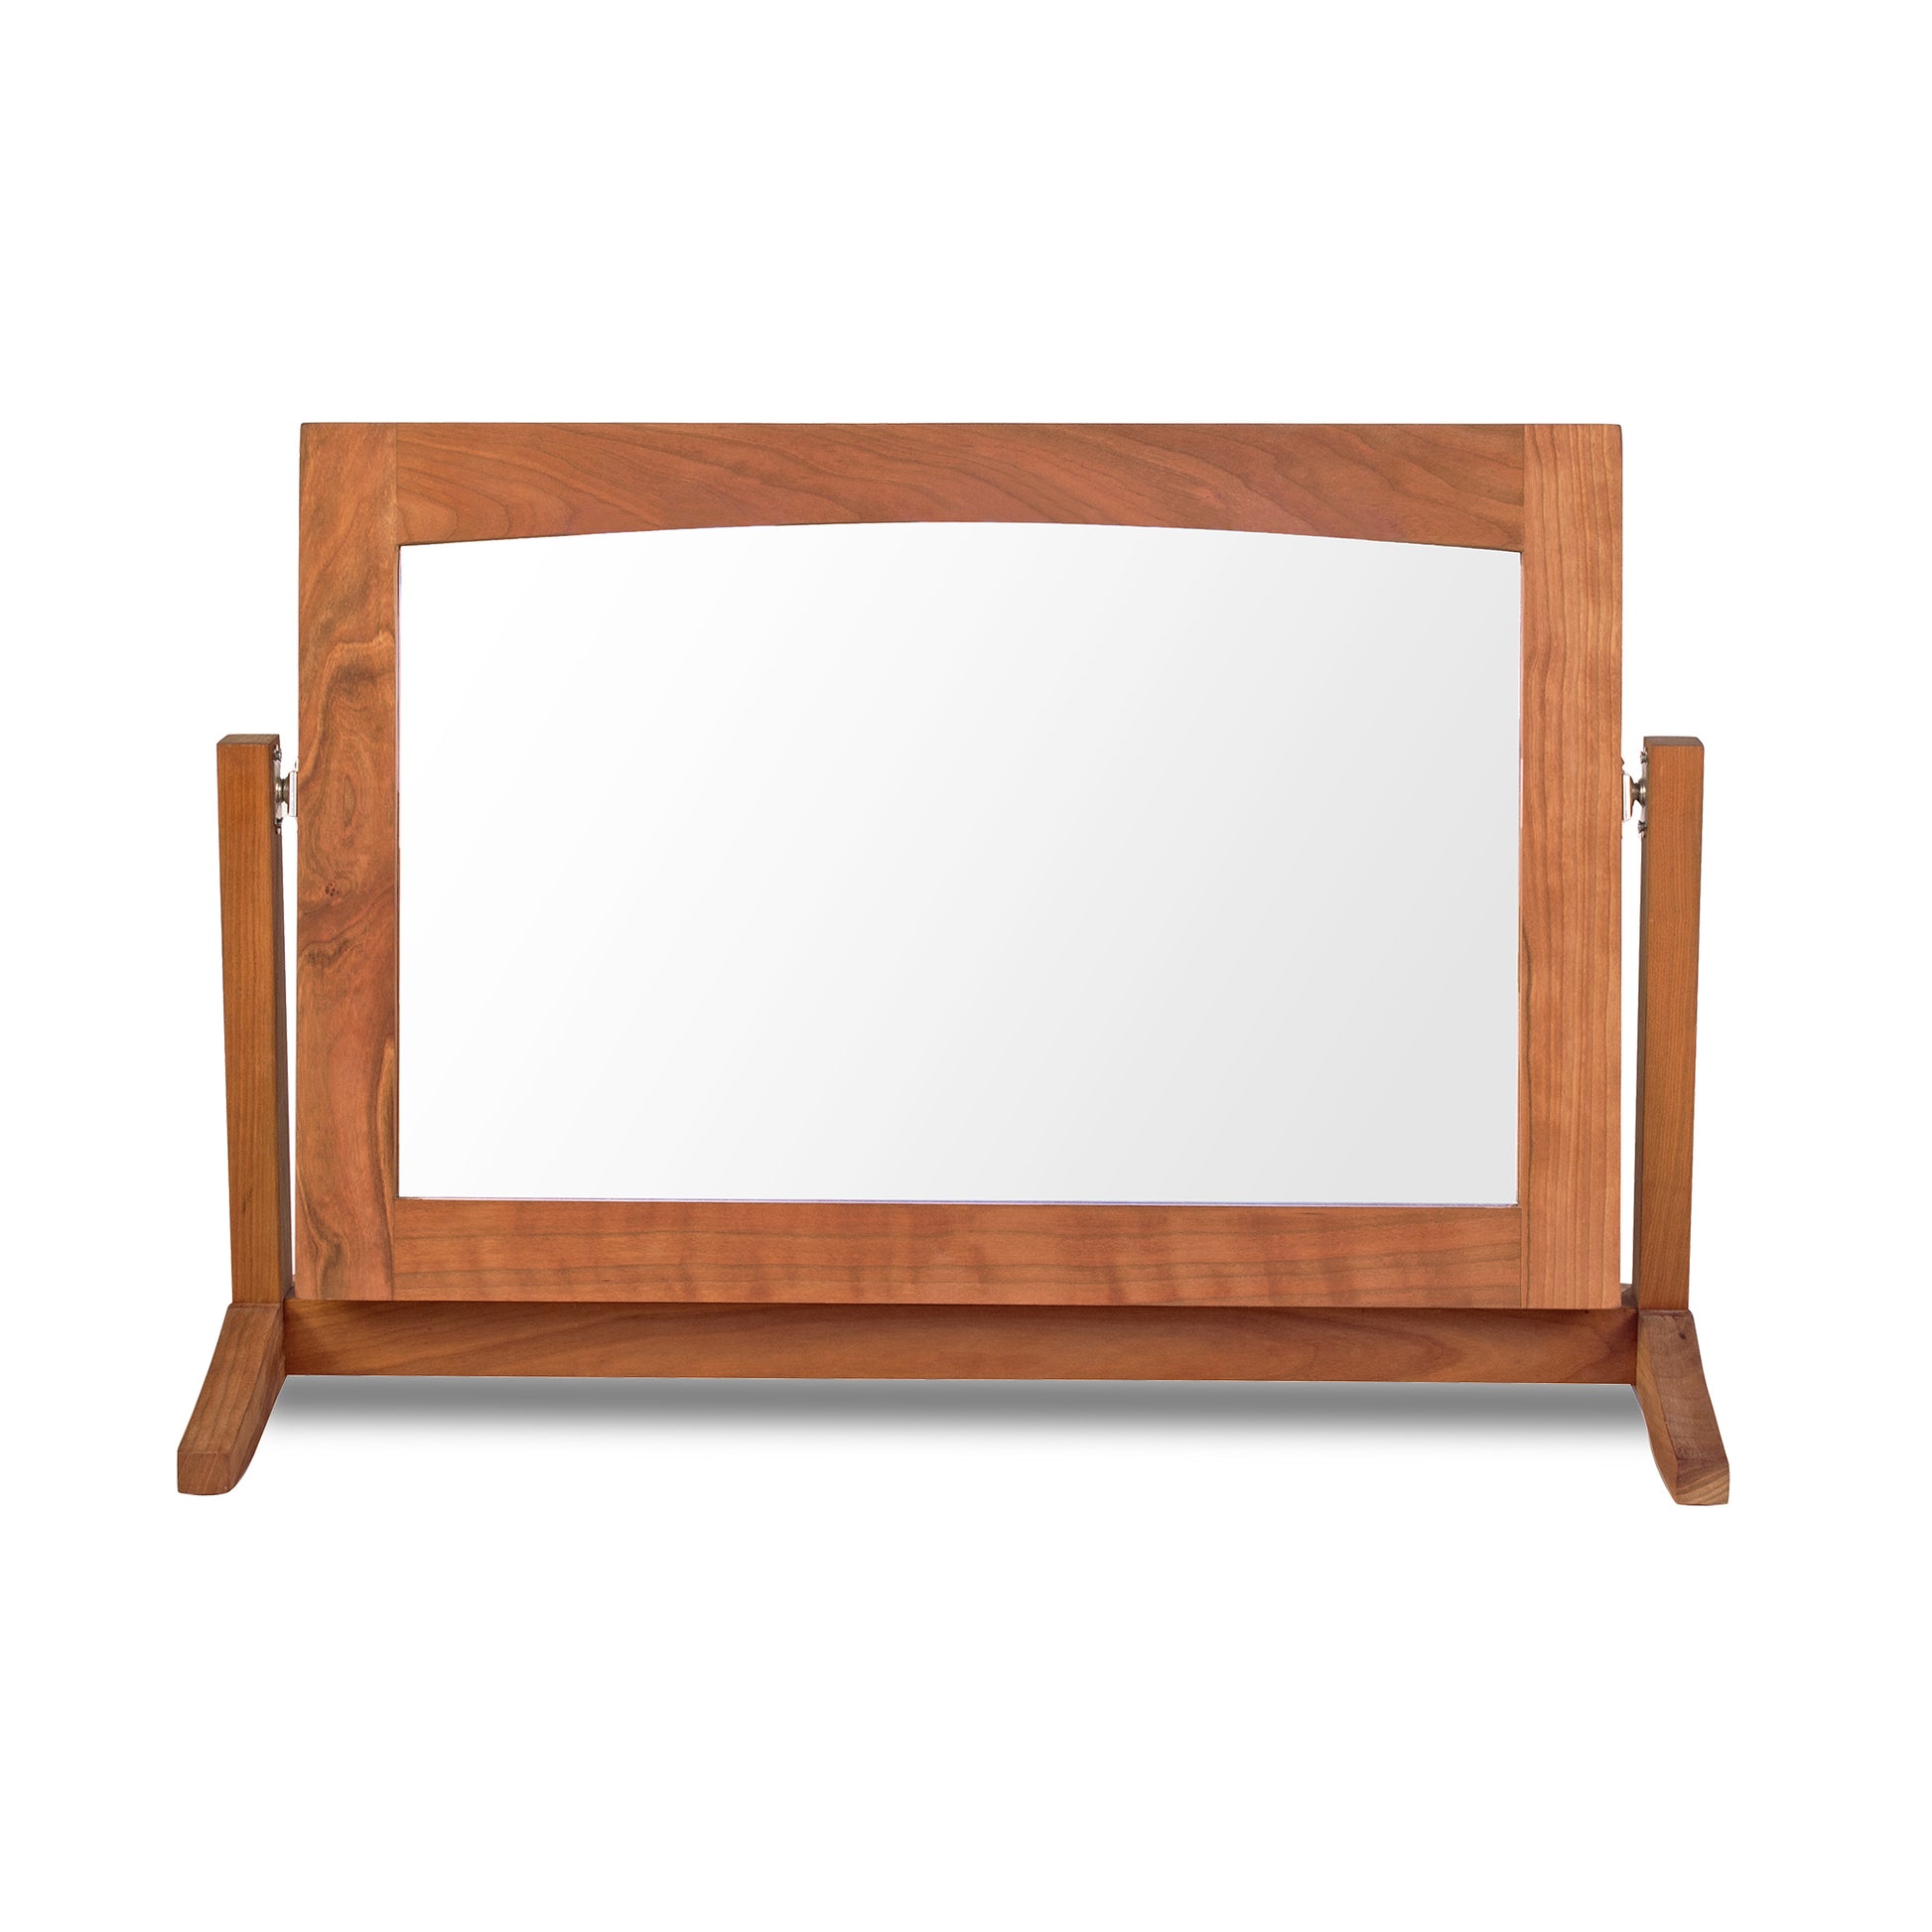 An adjustable New England Shaker Dresser Mirror handcrafted by Lyndon Furniture in Vermont, featuring a sustainable harvested solid wood stand, placed on a white background.